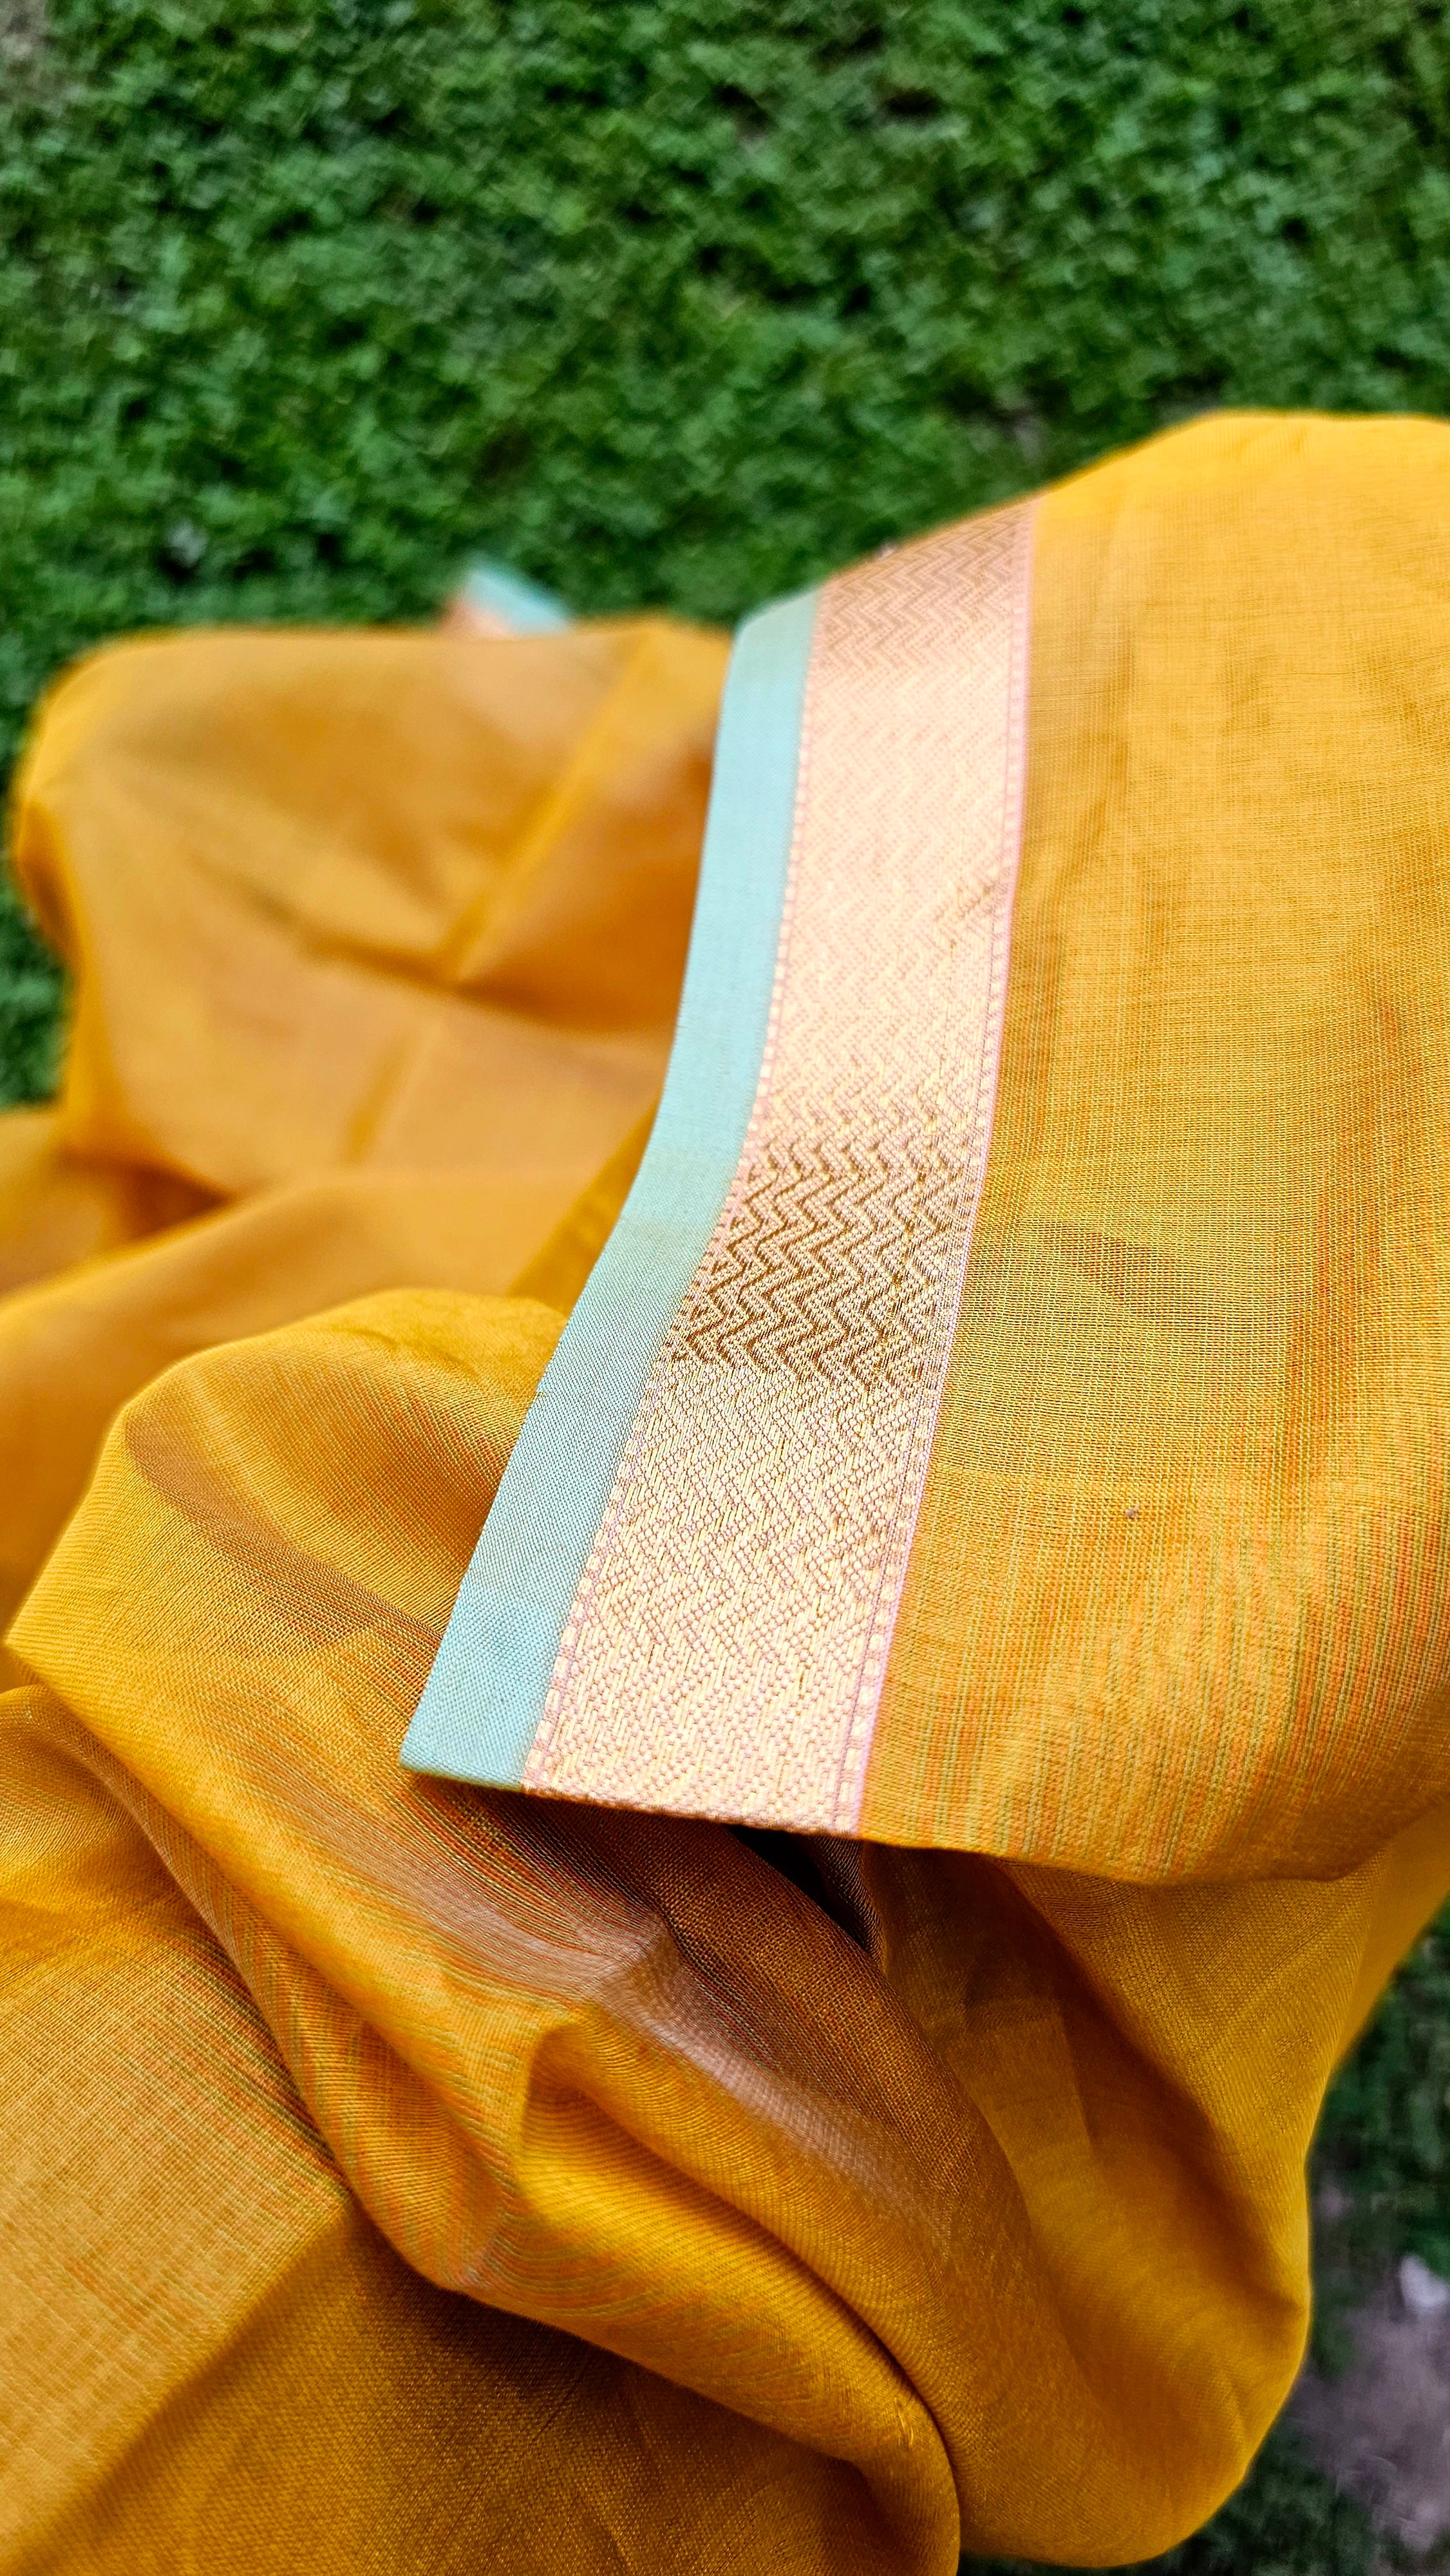 Traditional Raasta Dupatta with Gold Zari Borders and Green Selvedges.